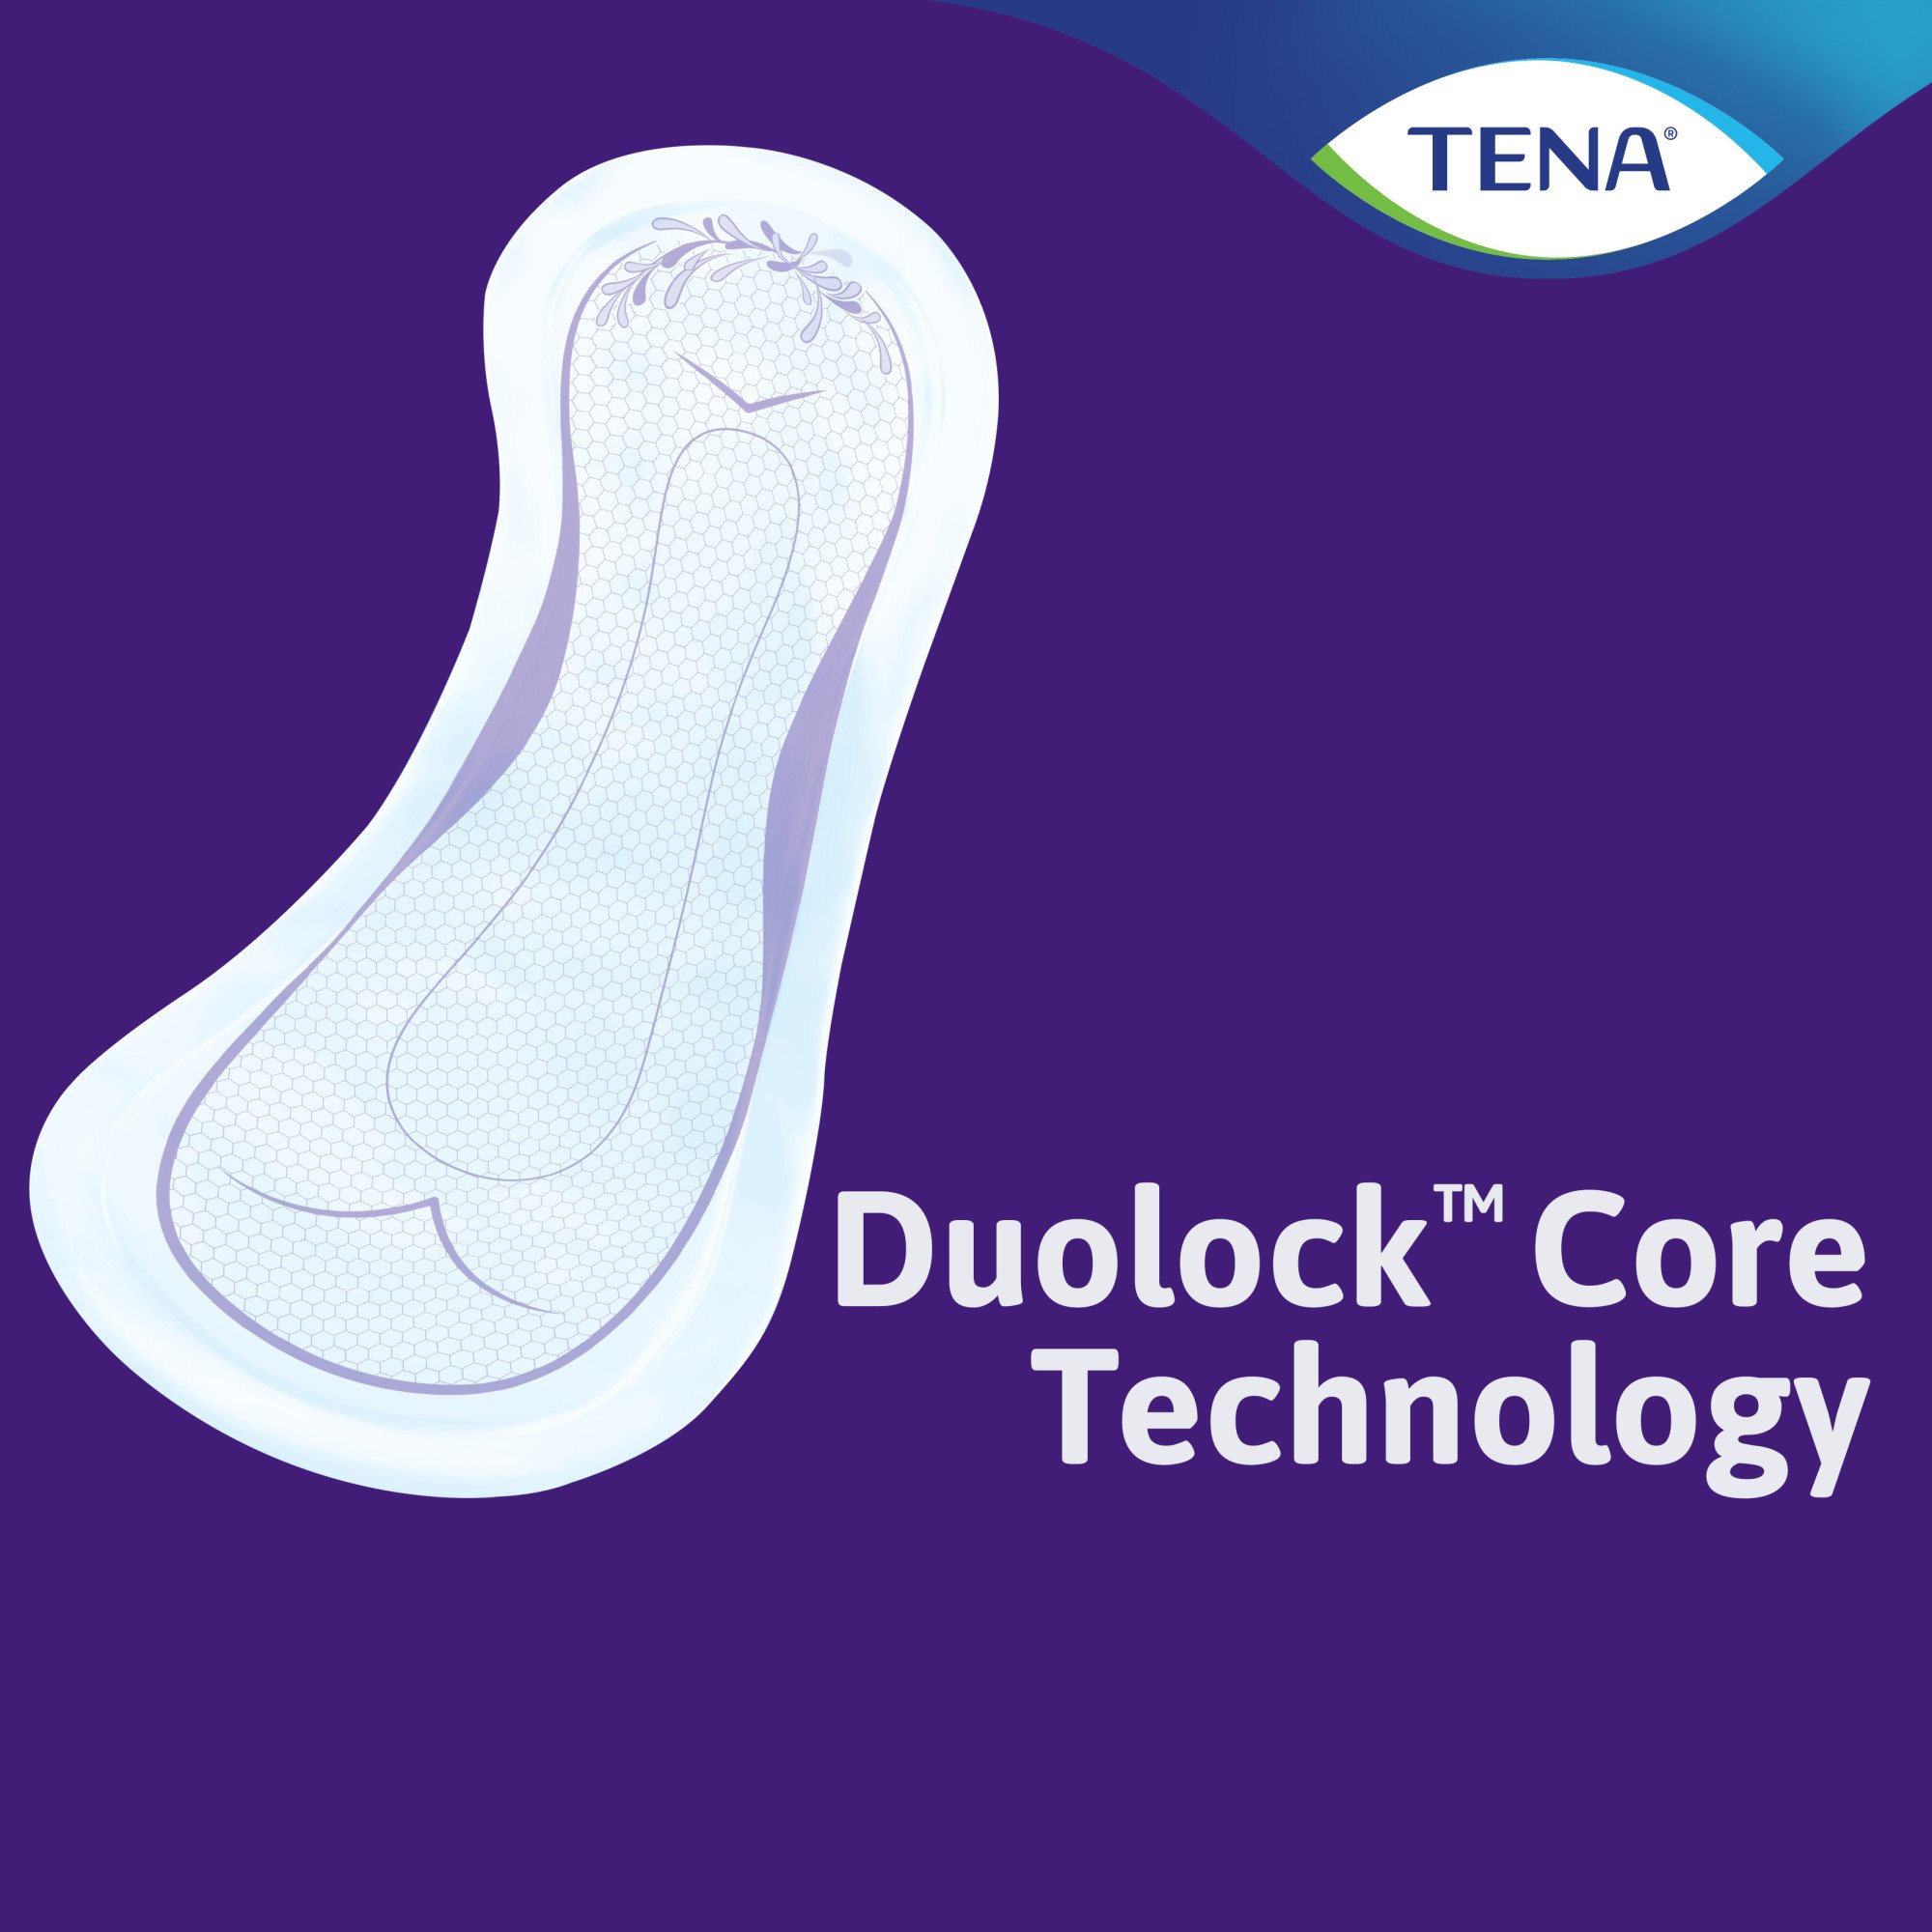 Tesco fits Tena incontinence pads with heavy-duty theft alarms